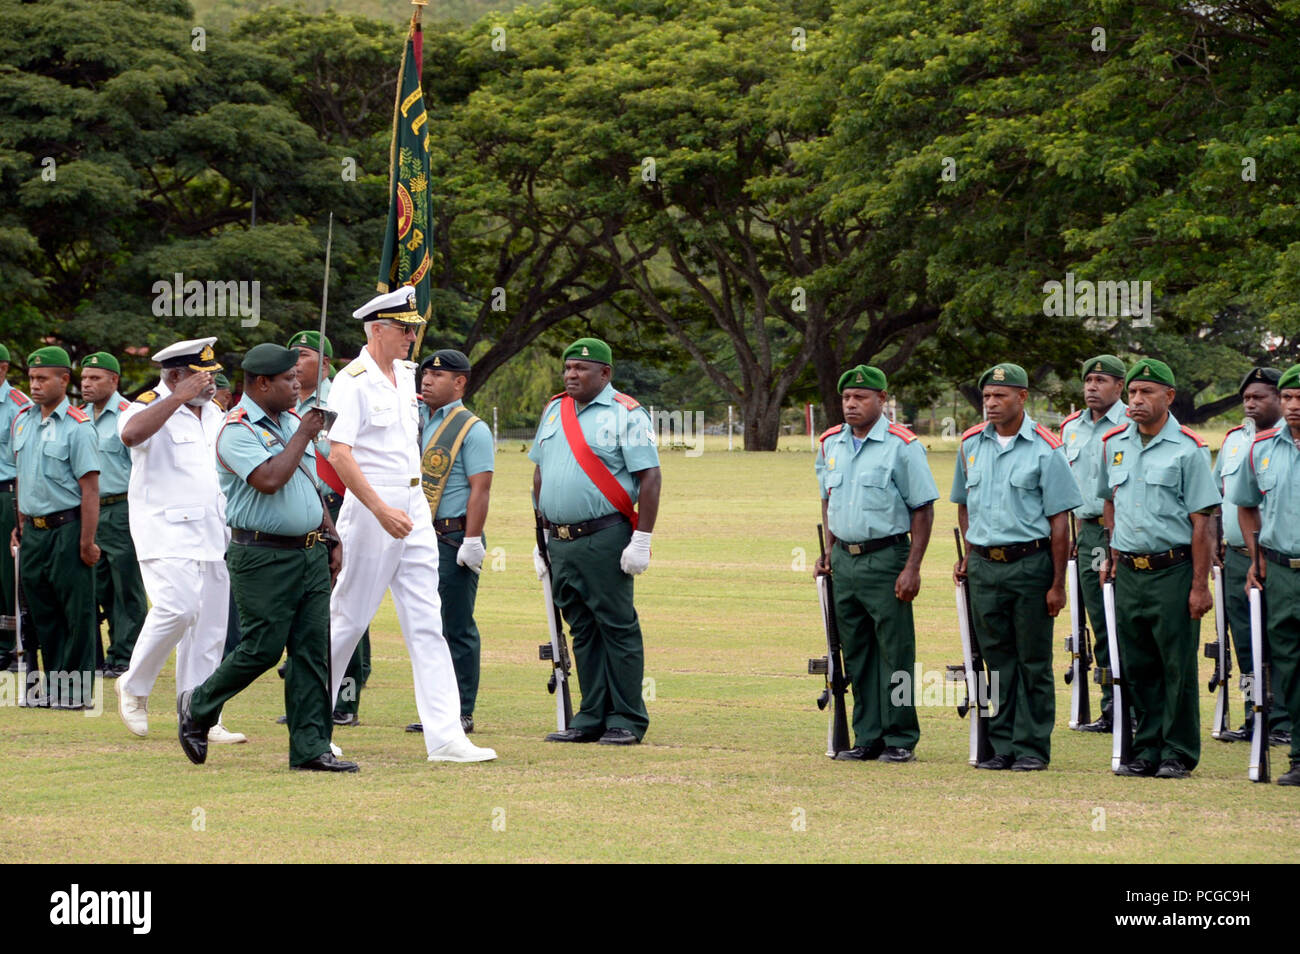 PORT MORESBY, Papua New Guinea (April 15, 2014)  Adm. Samuel J. Locklear, III, commander of U.S. Pacific Command, conducts an open ranks inspection at Murray Barracks as part of welcome parade. Locklear is in Papua New Guinea to meet with the country's political and military leaders to reaffirm the U.S-Papua New Guinea bilateral relationship and the strength of the partnership. Stock Photo